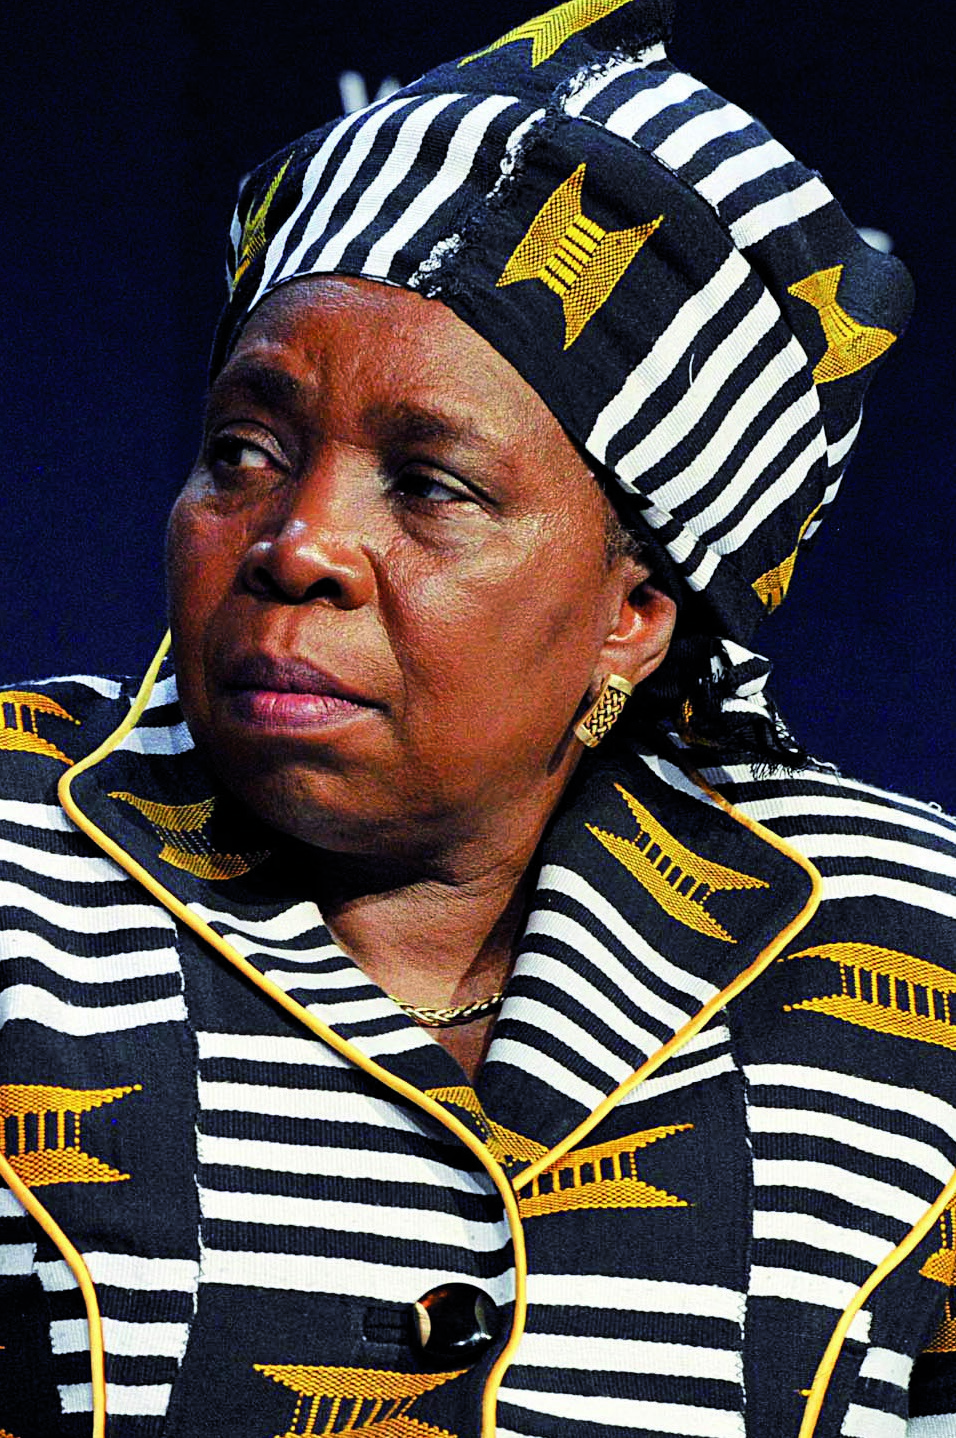  09052013w Beeld nuus (in the pic - Dr Nkosazana Dlamini Zuma - AU Chairperson). President Jacob Zuma addressed the WEF Plenary session on BRICS. The session titled Building with BRICS discussed "how will collaboration with BRICS empower Africa to deliver on its promise". Prof Klaus Schwab, Founder and Executive Chairman of the World ECONONIC Forum (WEF) chaired the session. CTICC, Cape Town, Foto Elmond Jiyane, GCIS. 13/05/2013 PHOTO:  